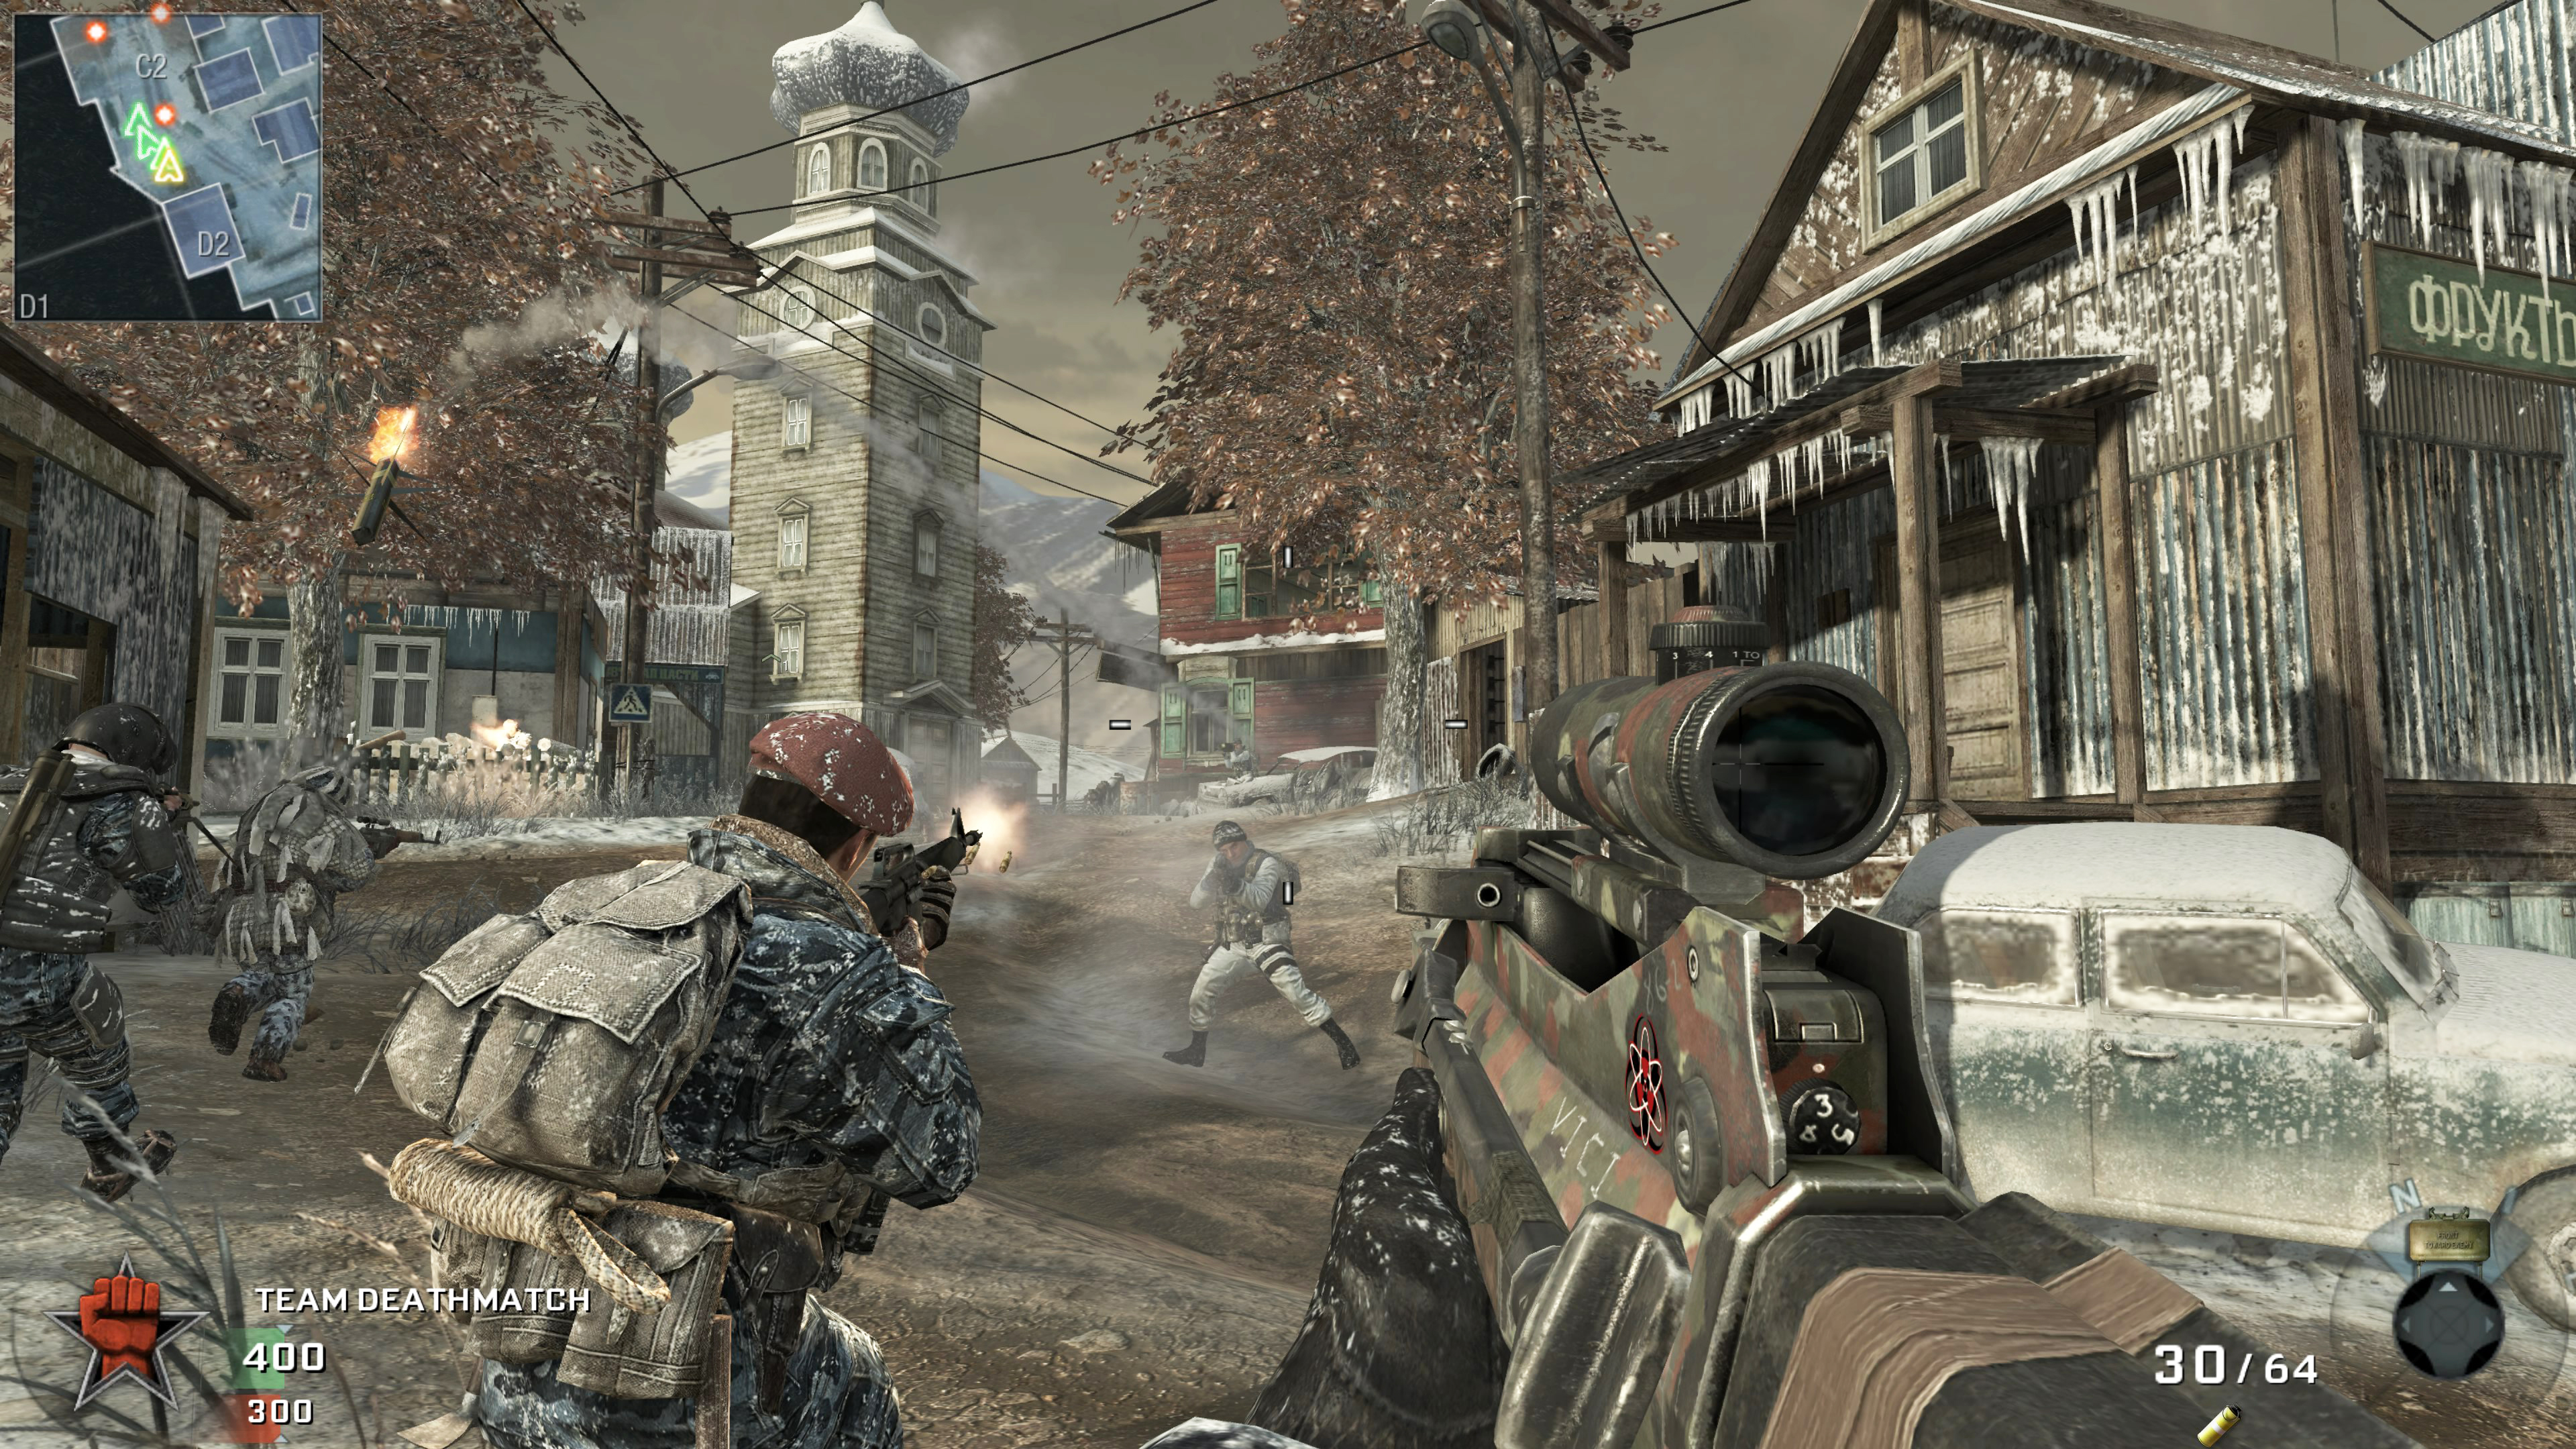 Review: Call of Duty Modern Warfare 2 map pack is just so-so